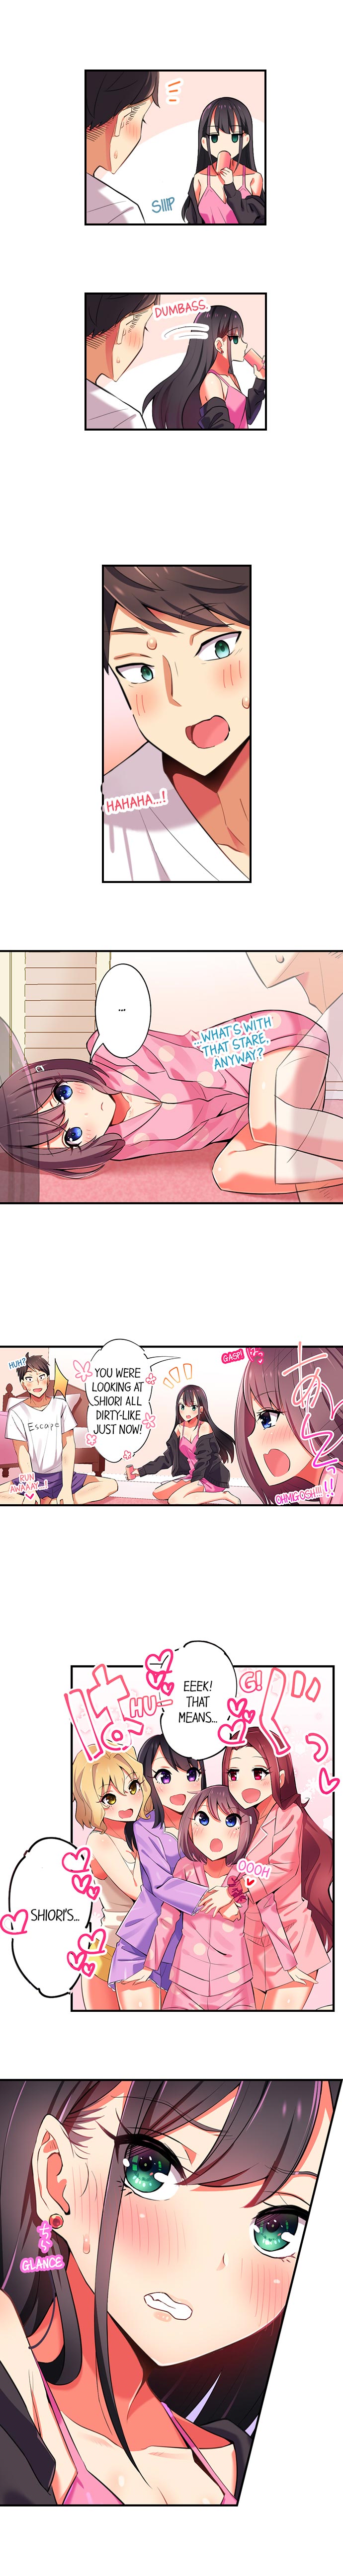 Fucking My Niece at the Girls’ Pajama Party - Chapter 1 Page 6